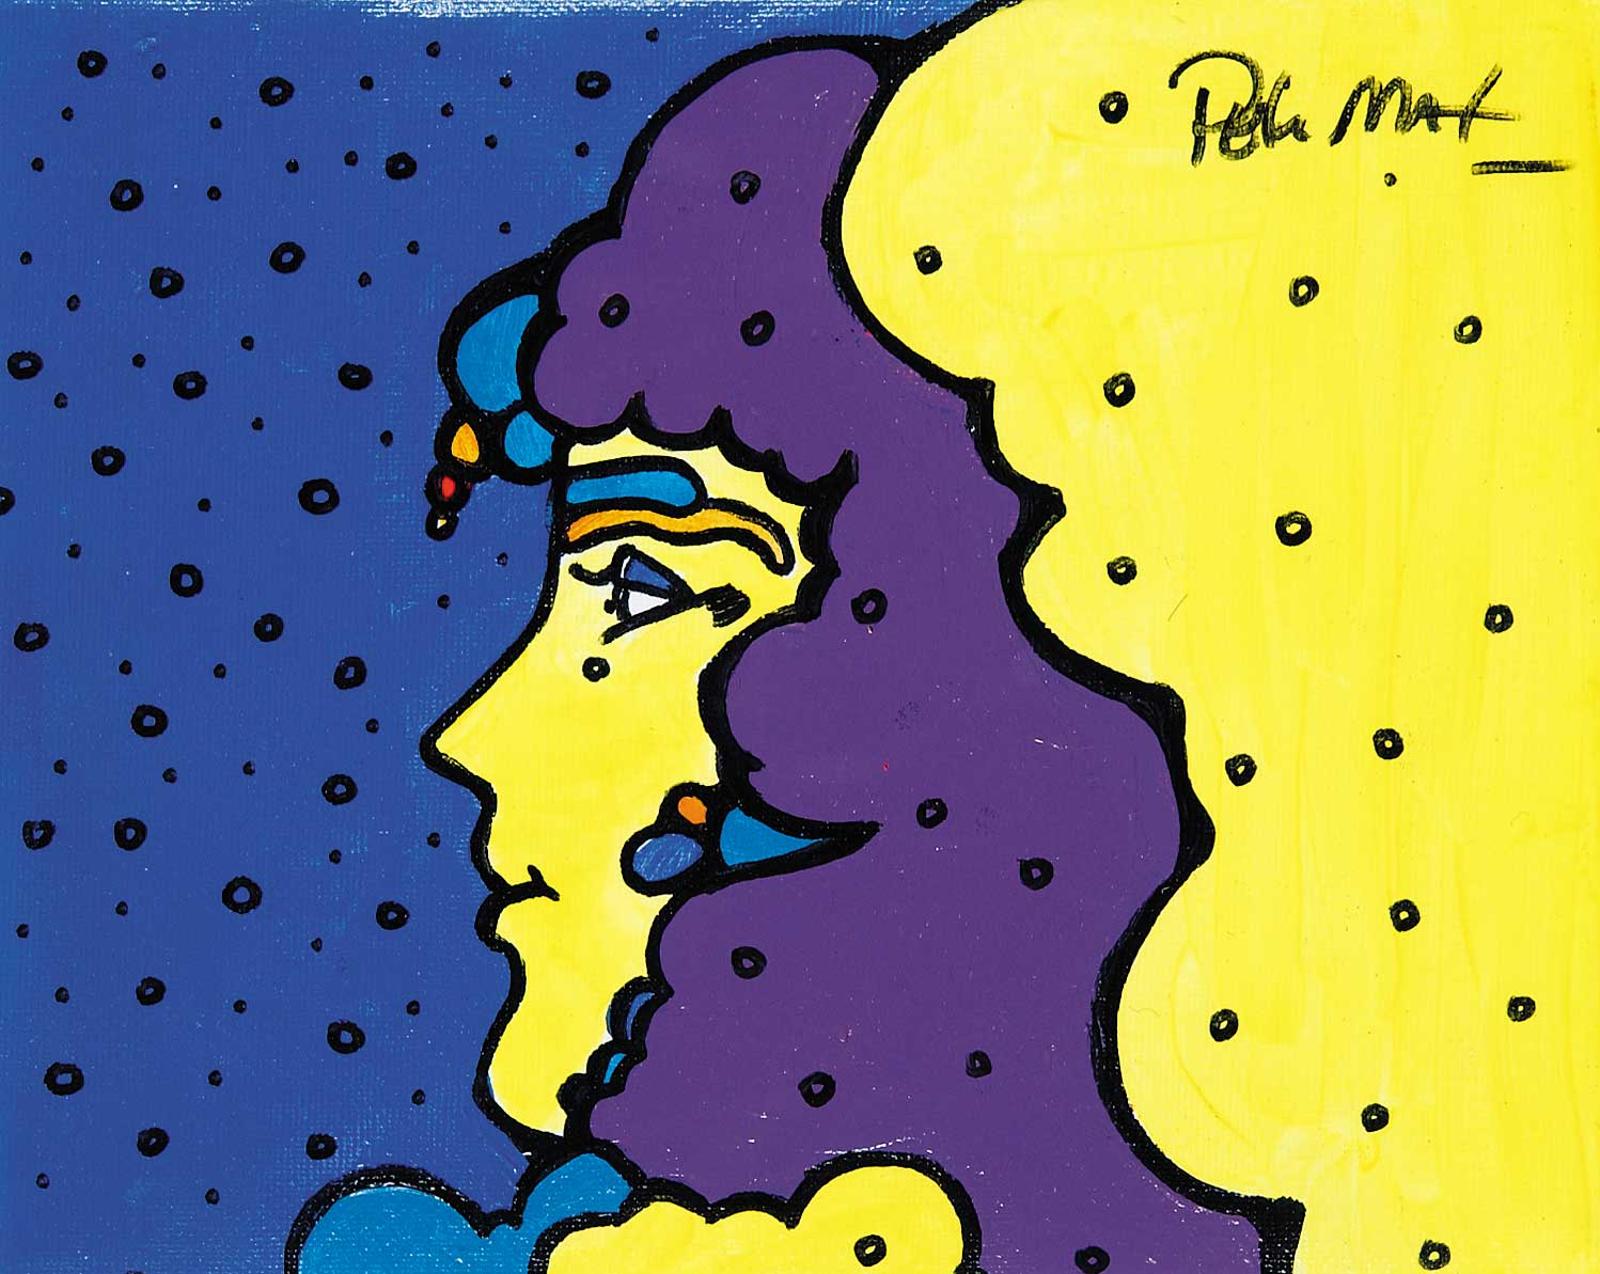 Peter Max (1937) - Untitled - Zen Max Series - Lucy with the Purple Hair